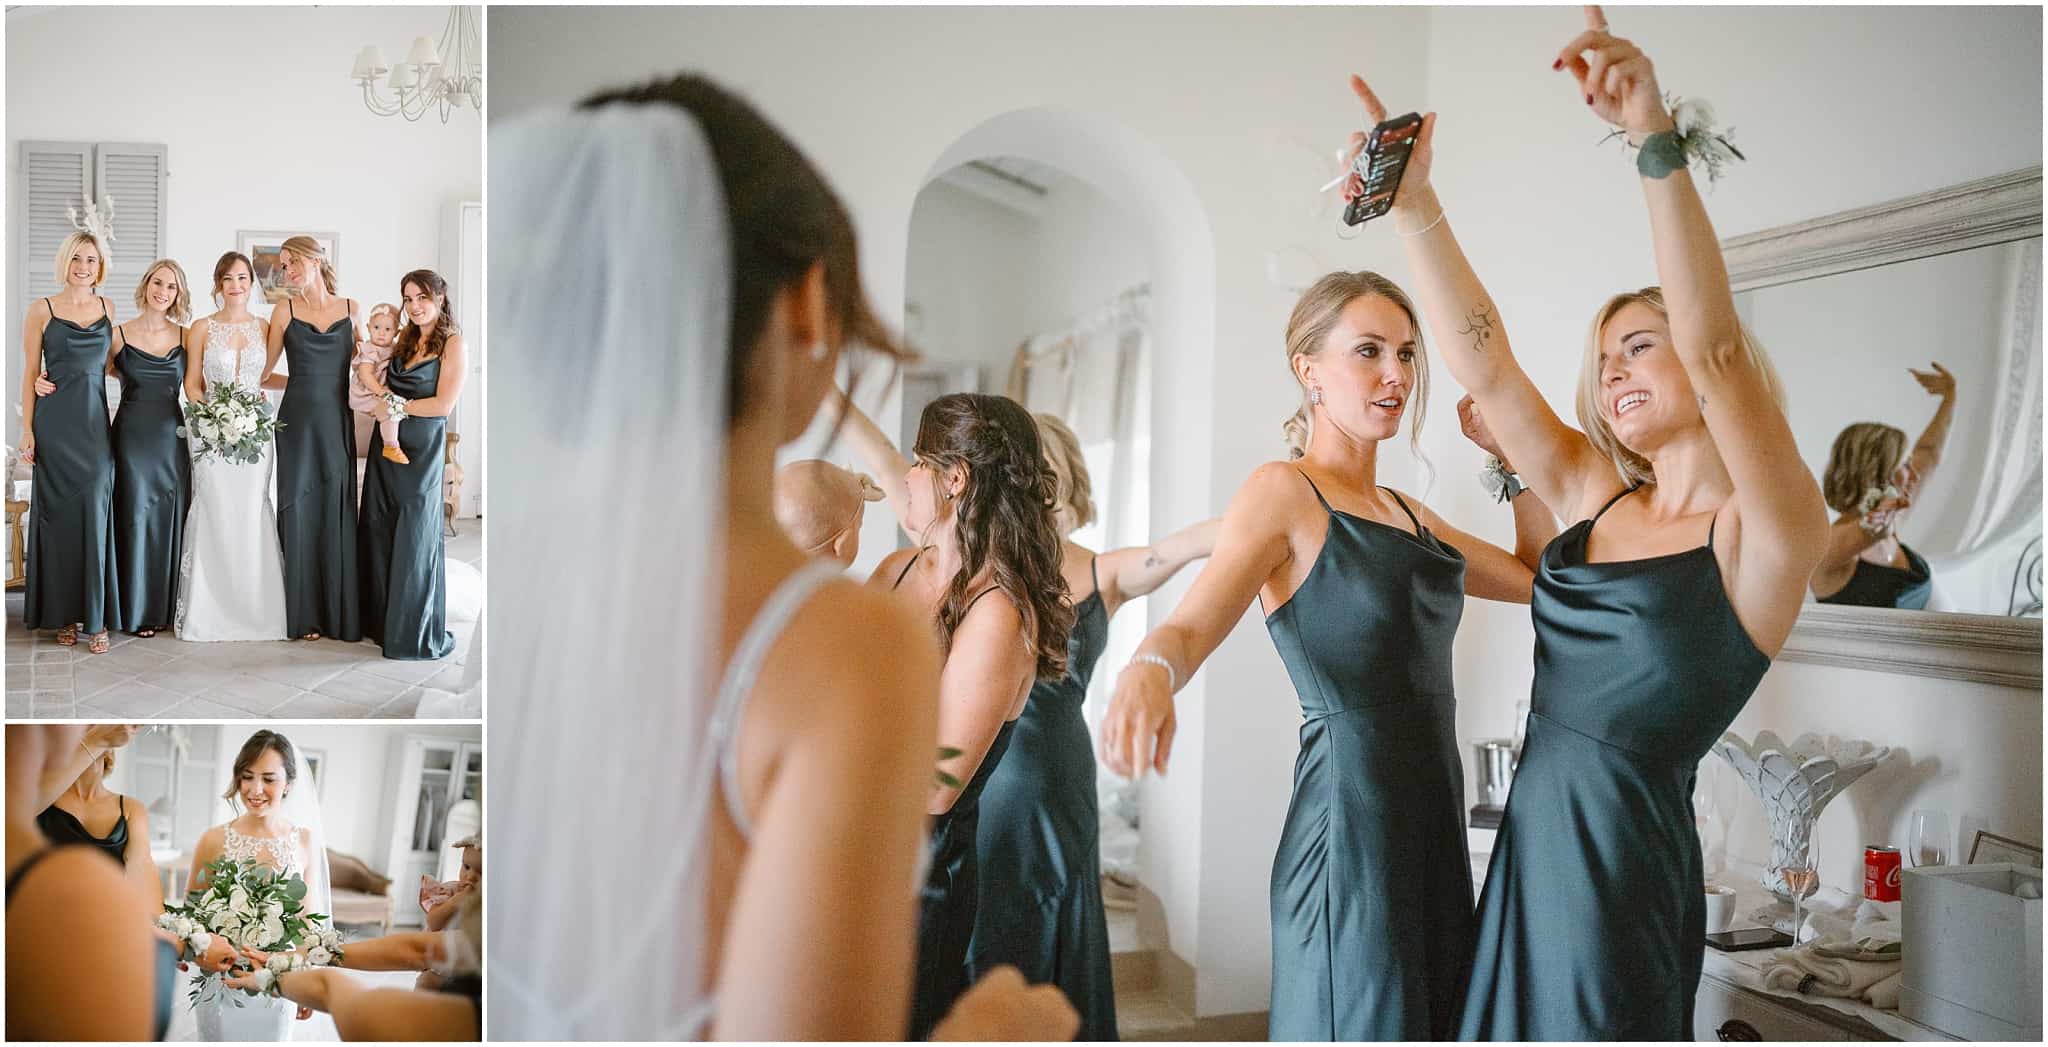 Bride having fun with her friends on her wedding day